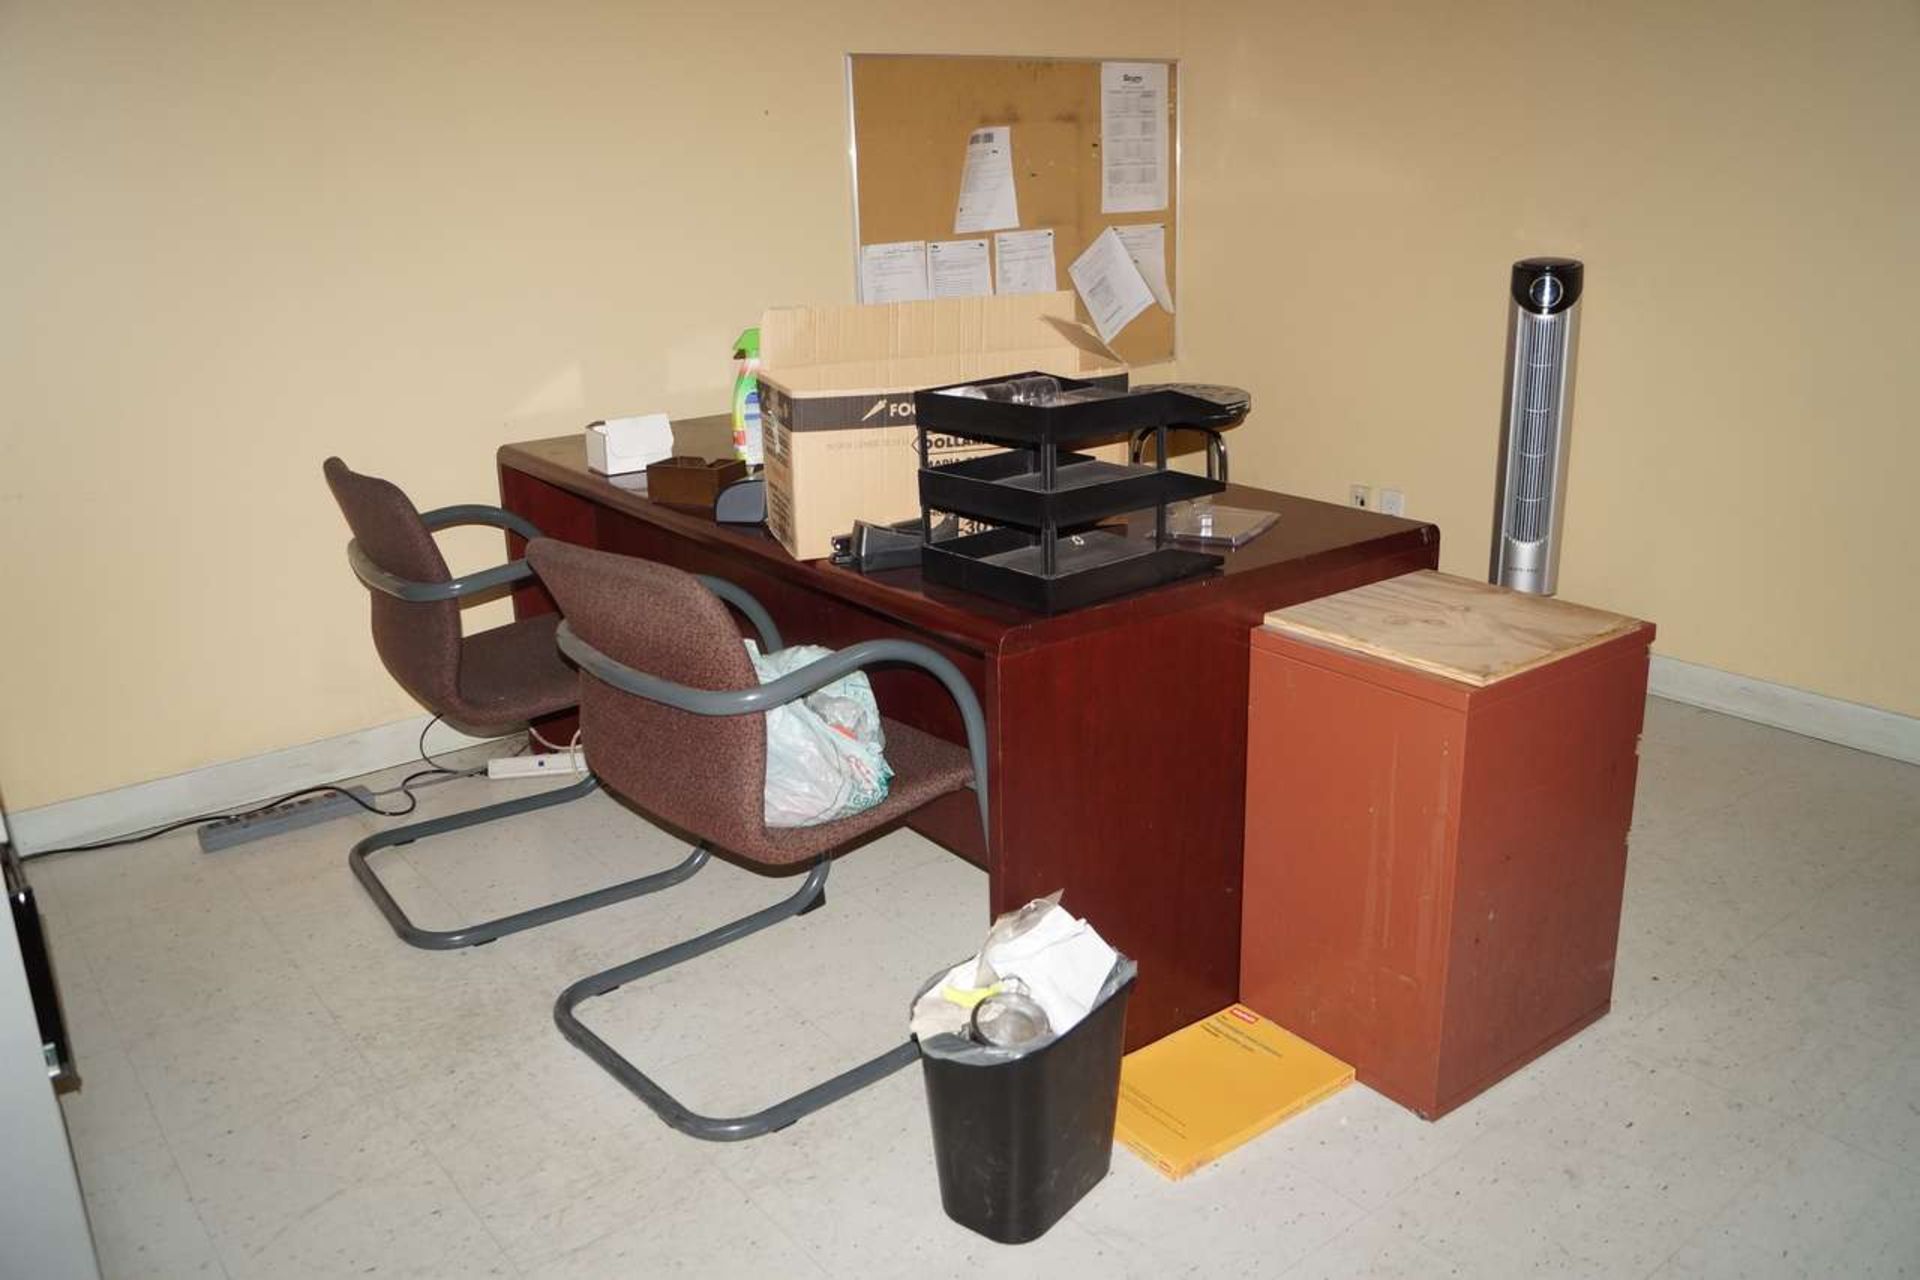 Contents of Cafeteria & Office Area - Image 13 of 14